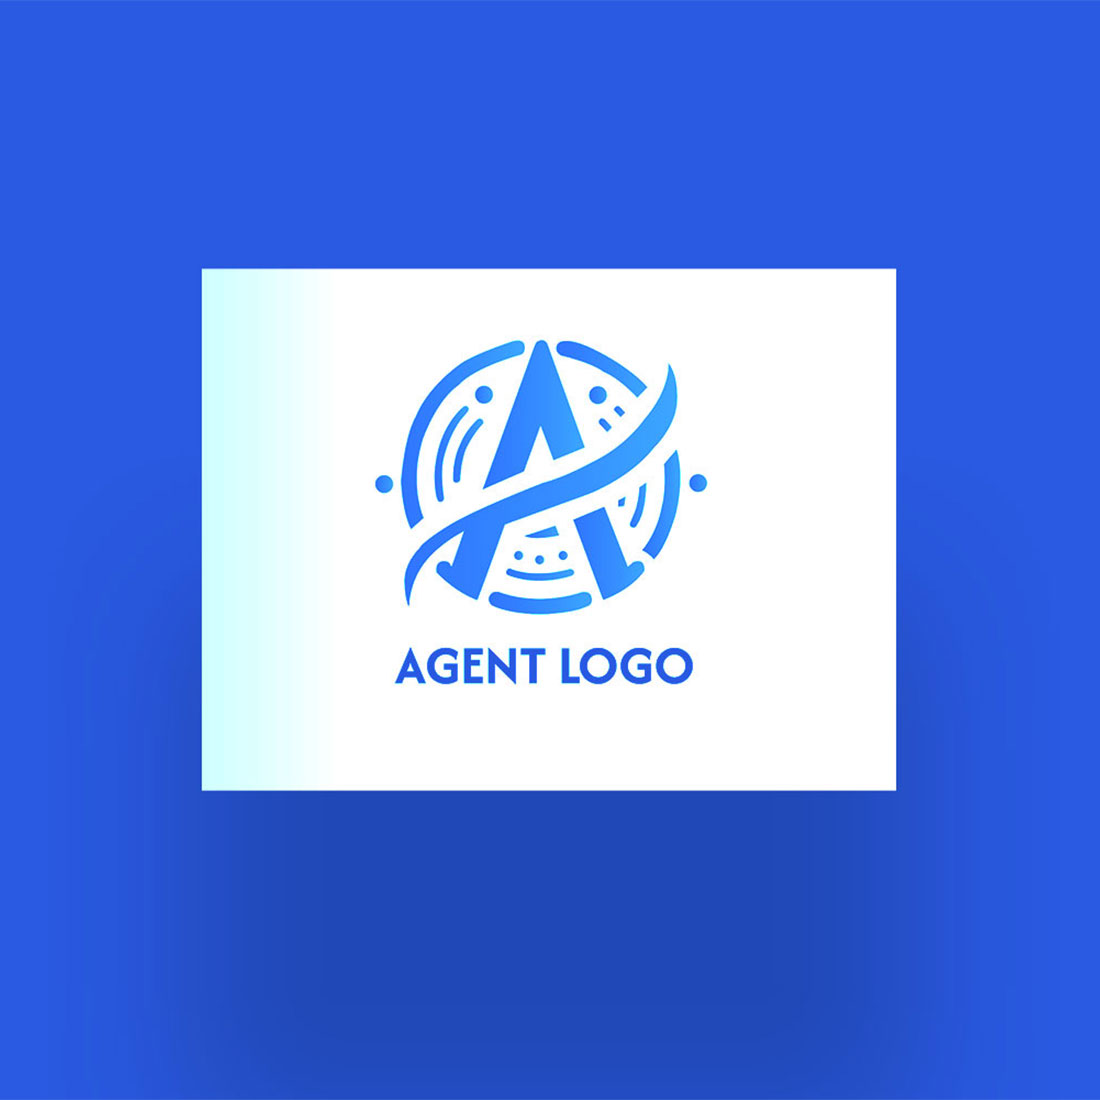 A Letter Logo Show of Agent preview image.